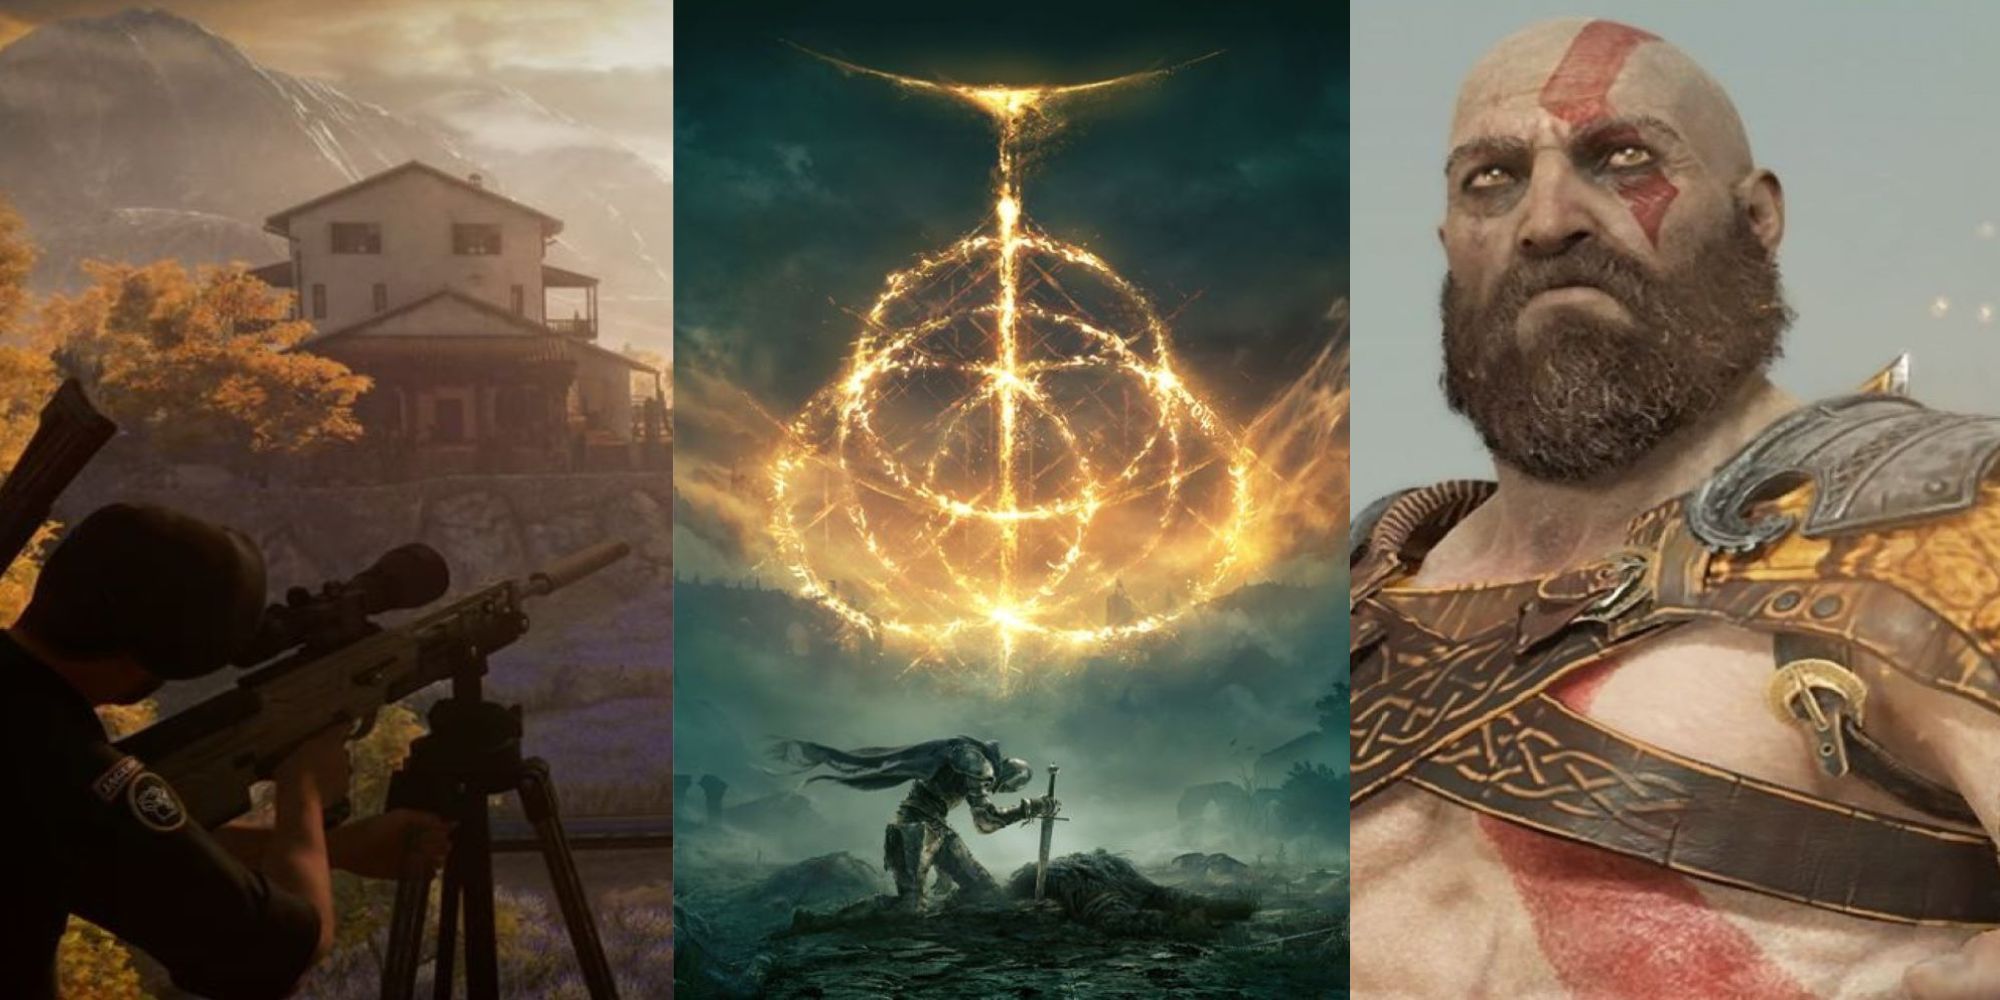 A collage showing screenshots of Hitman 3, Elden Ring, and God of War.